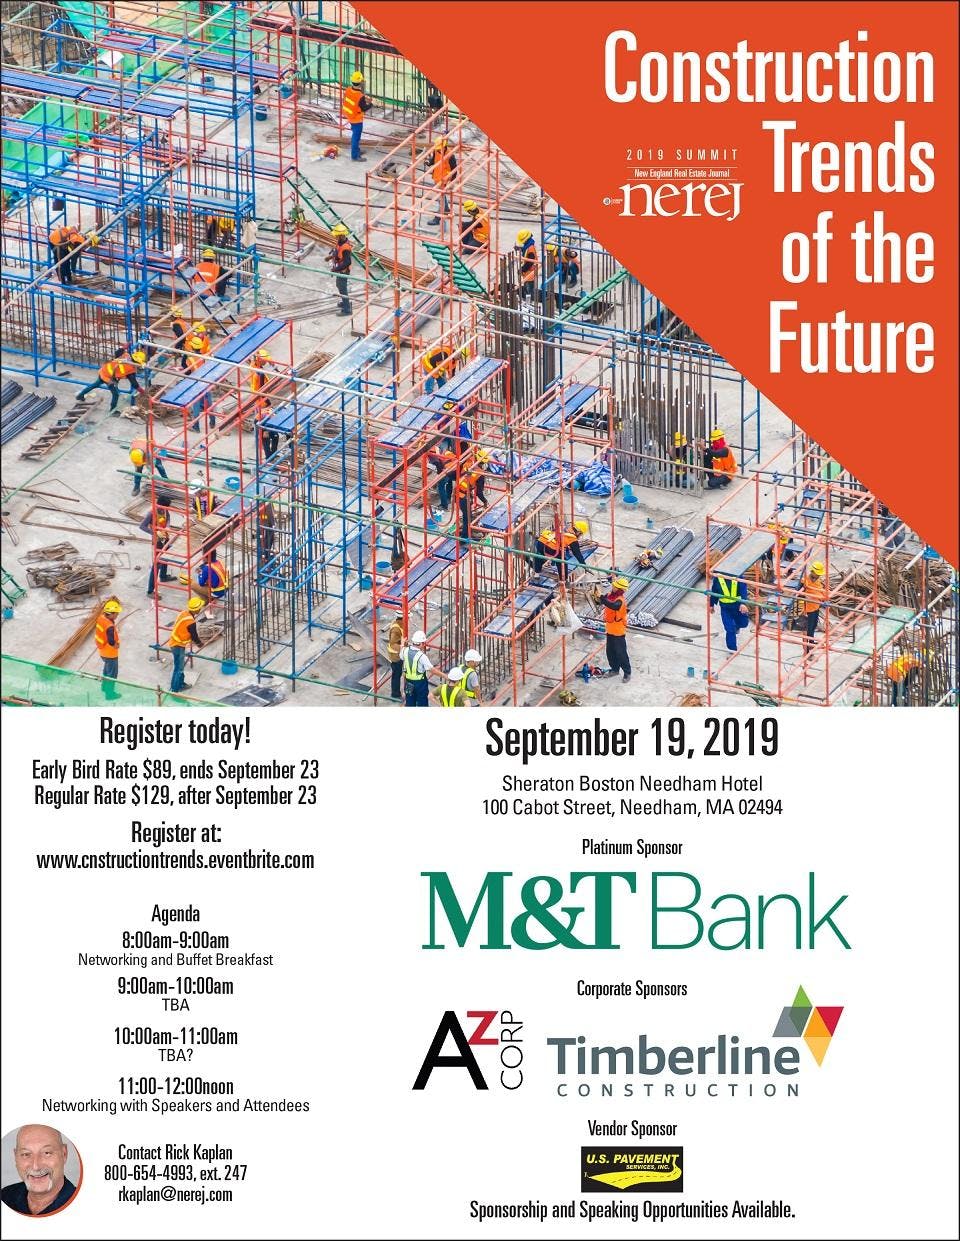 Construction Trends of the Future